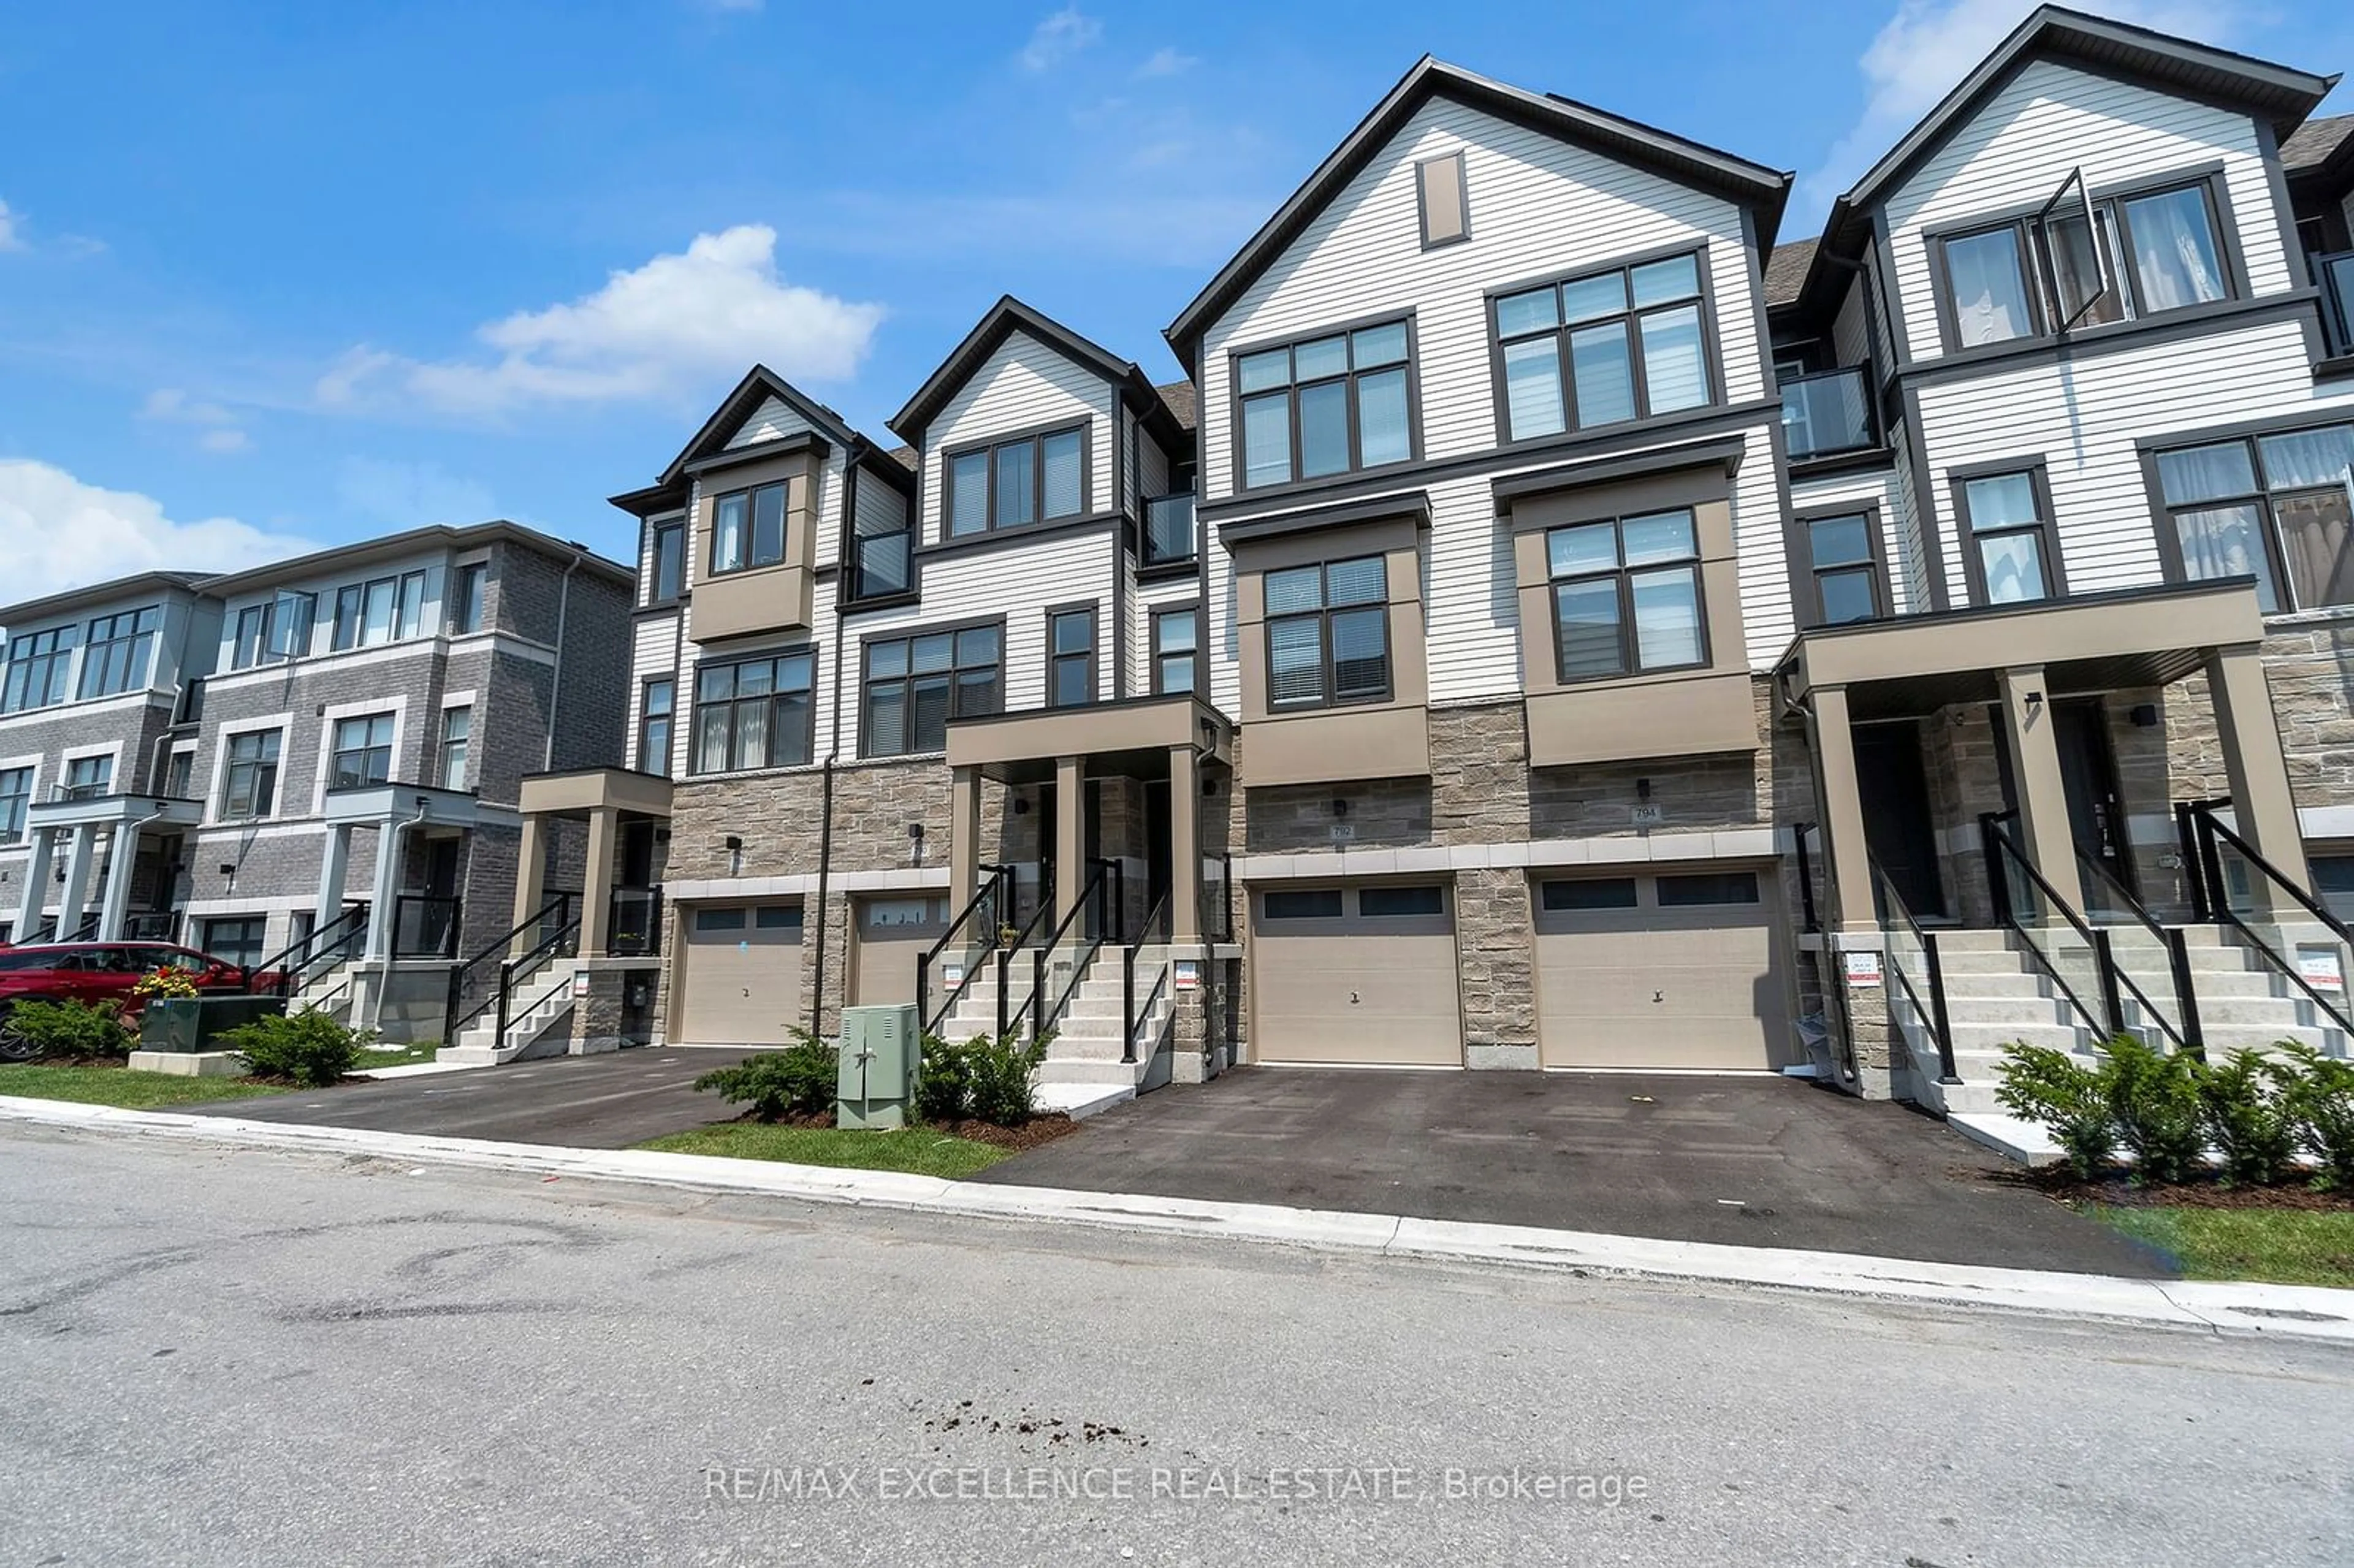 A pic from exterior of the house or condo for 792 Kootenay Path, Oshawa Ontario L1H 0B1